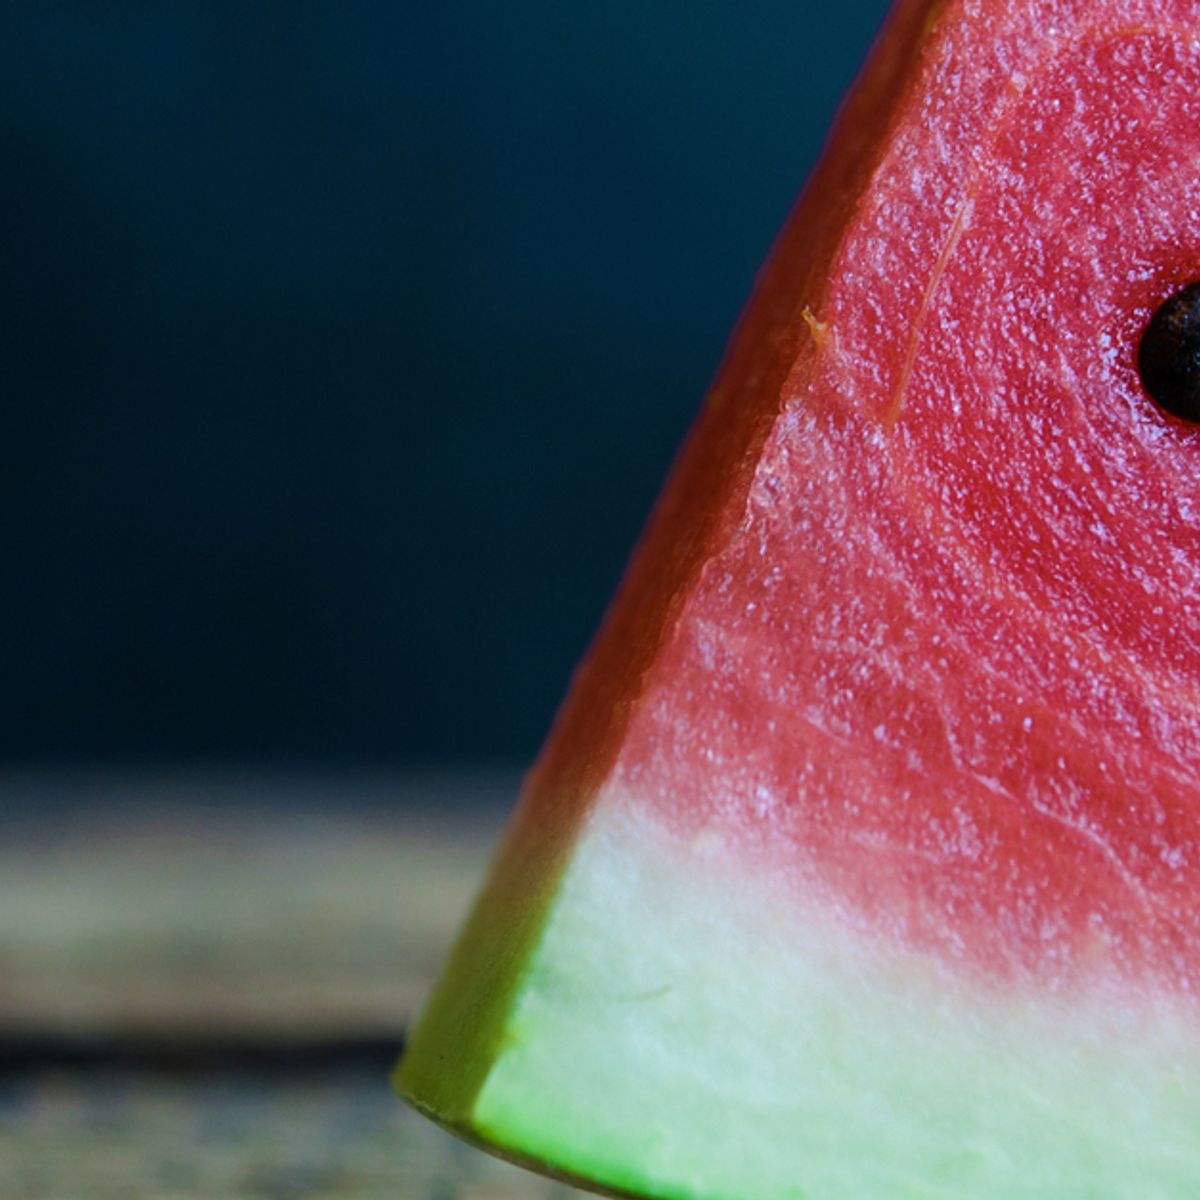 How Watermelons Became a Racist Trope - The Atlantic